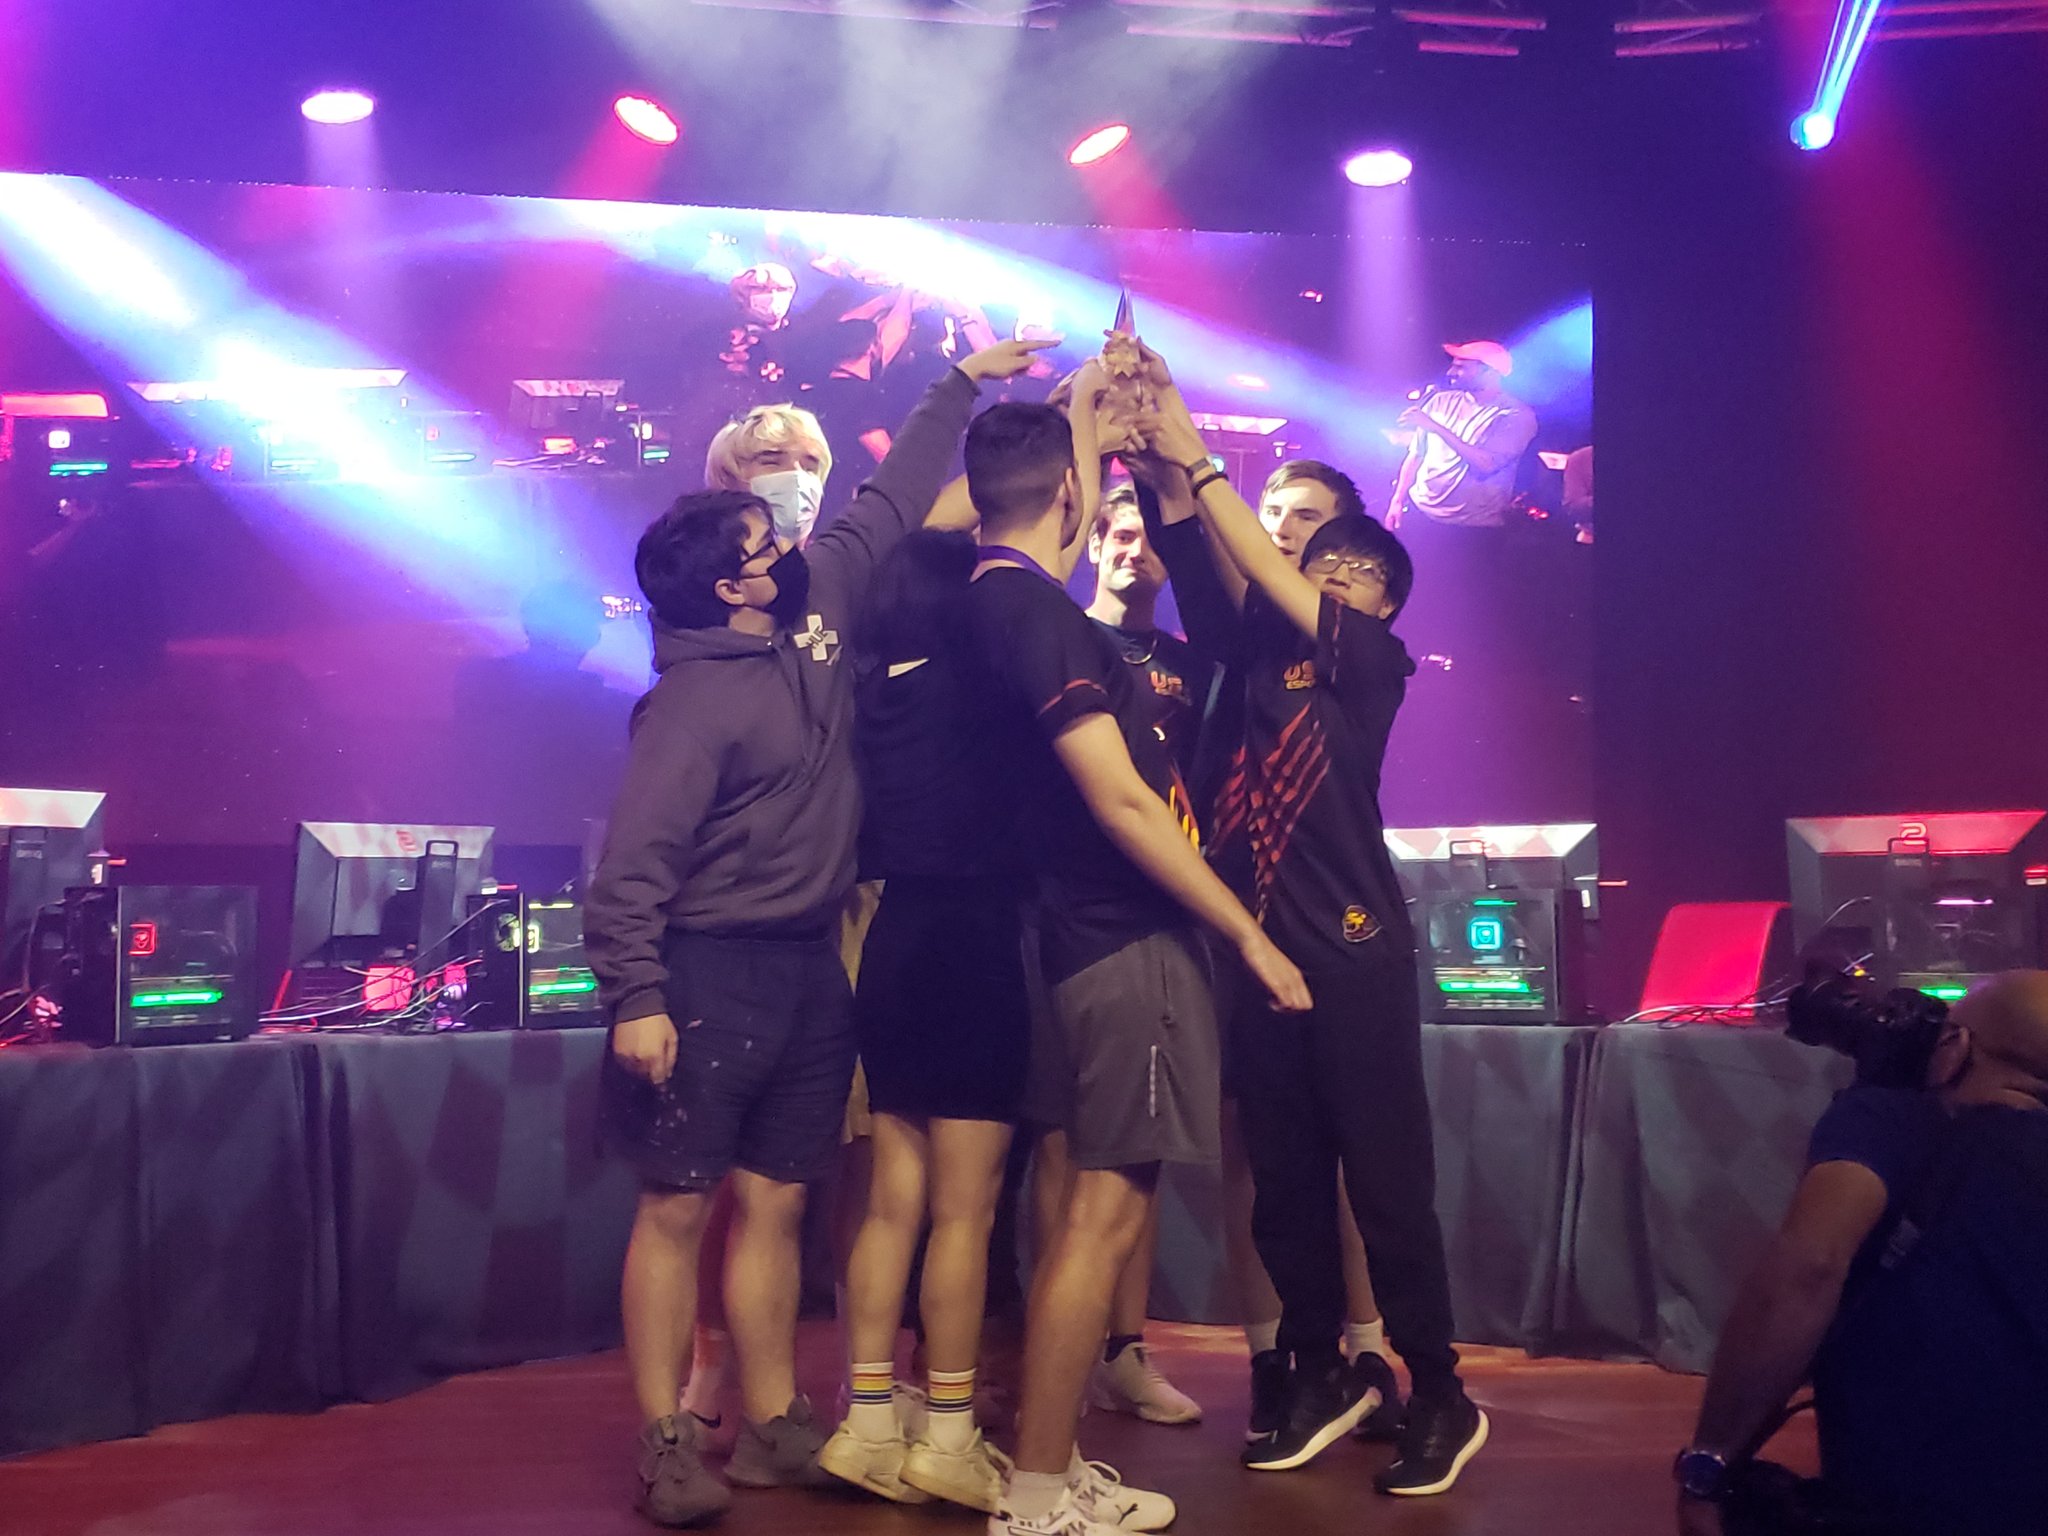 Esports Takes Home First Place in 2021 HUE Invitational